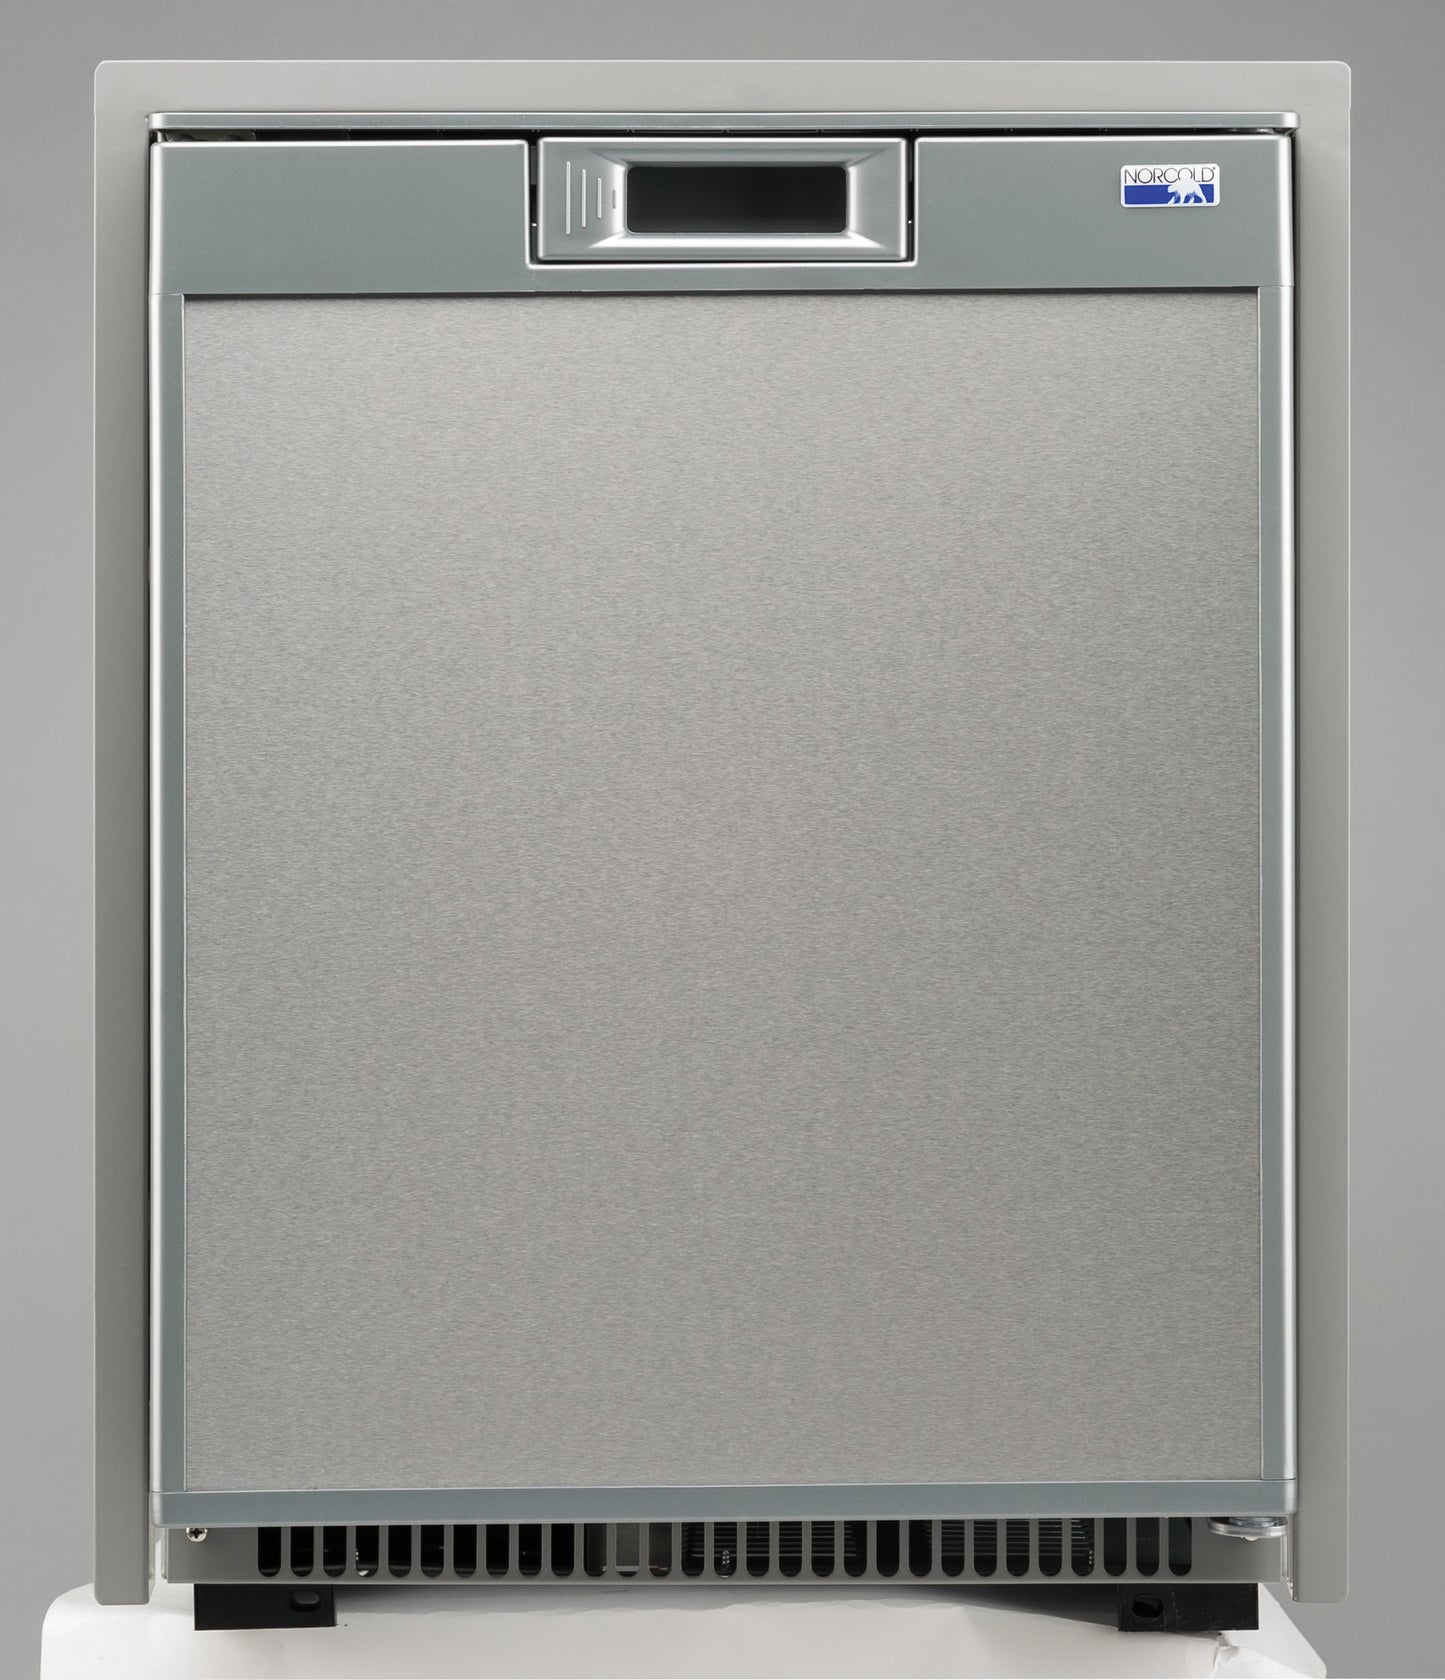 Norcold NR740SS AC/DC Single Compartment Refrigerator With Freezer, 1.7 cu. ft - N6DNR740SS